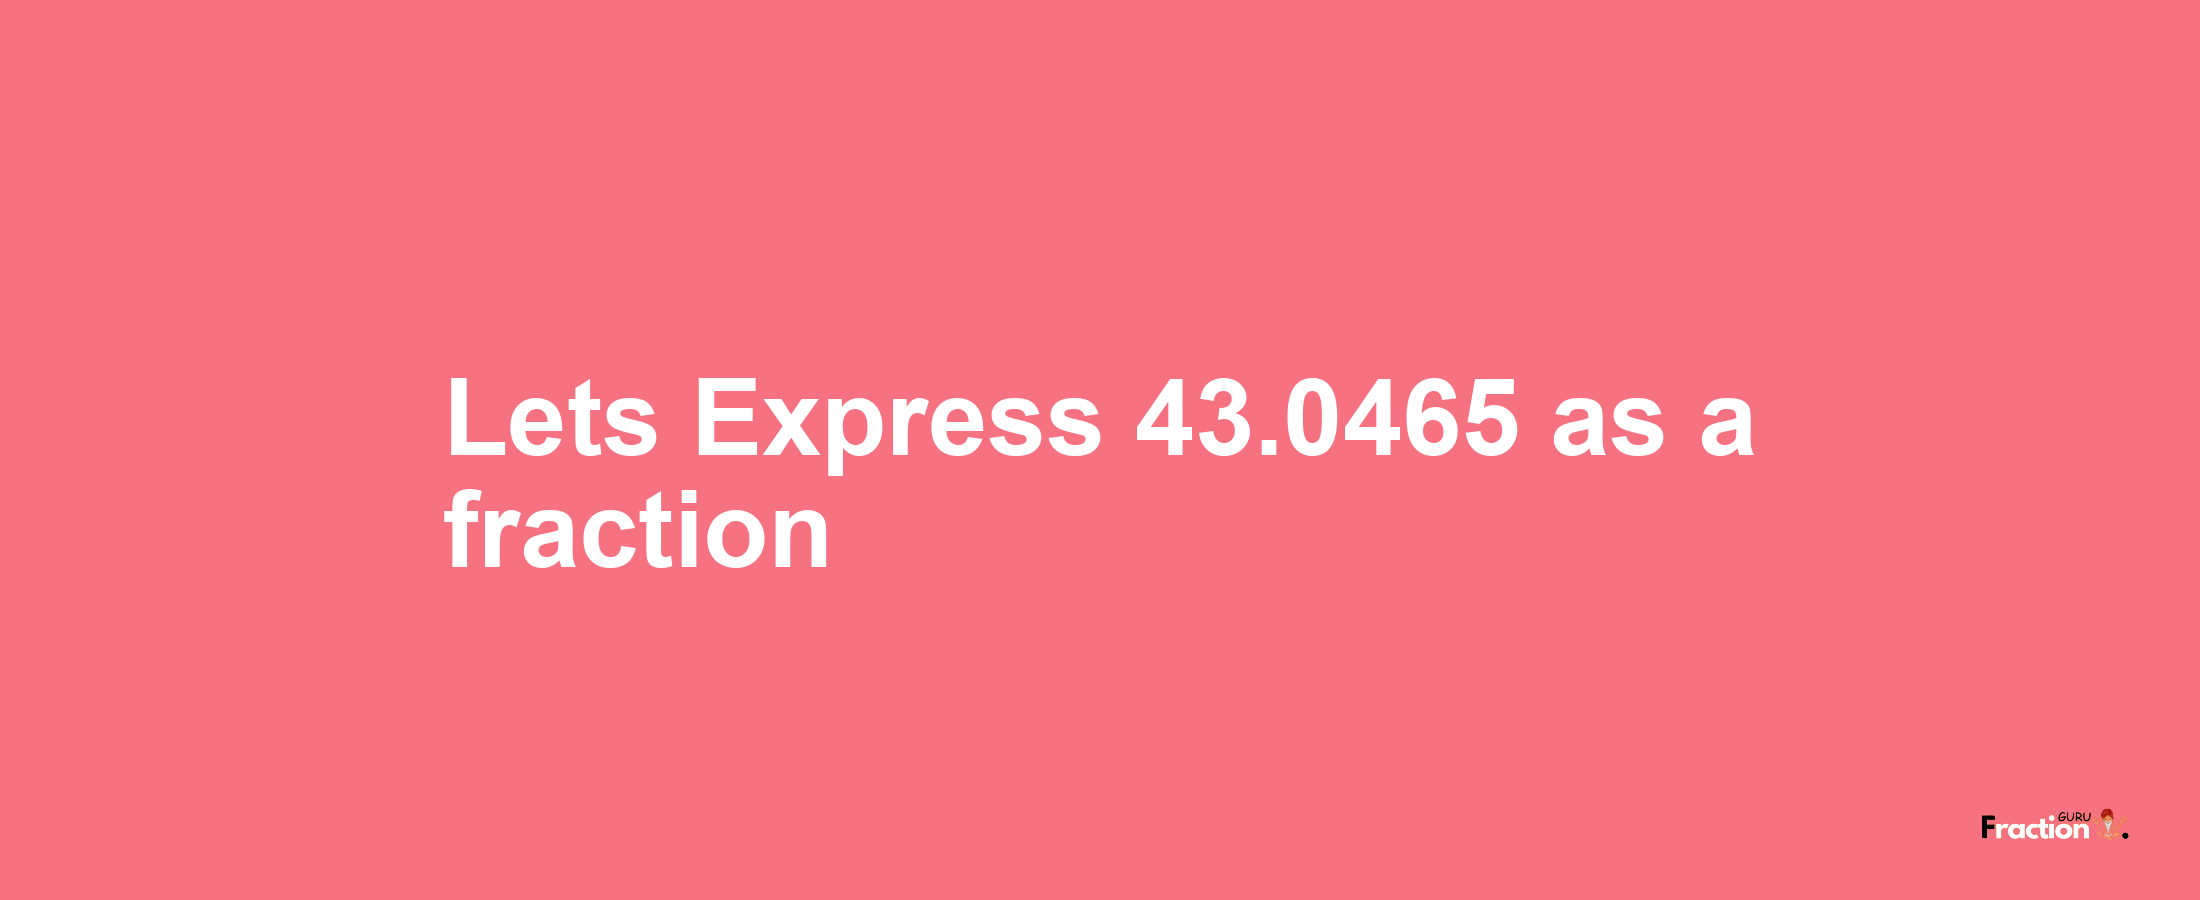 Lets Express 43.0465 as afraction